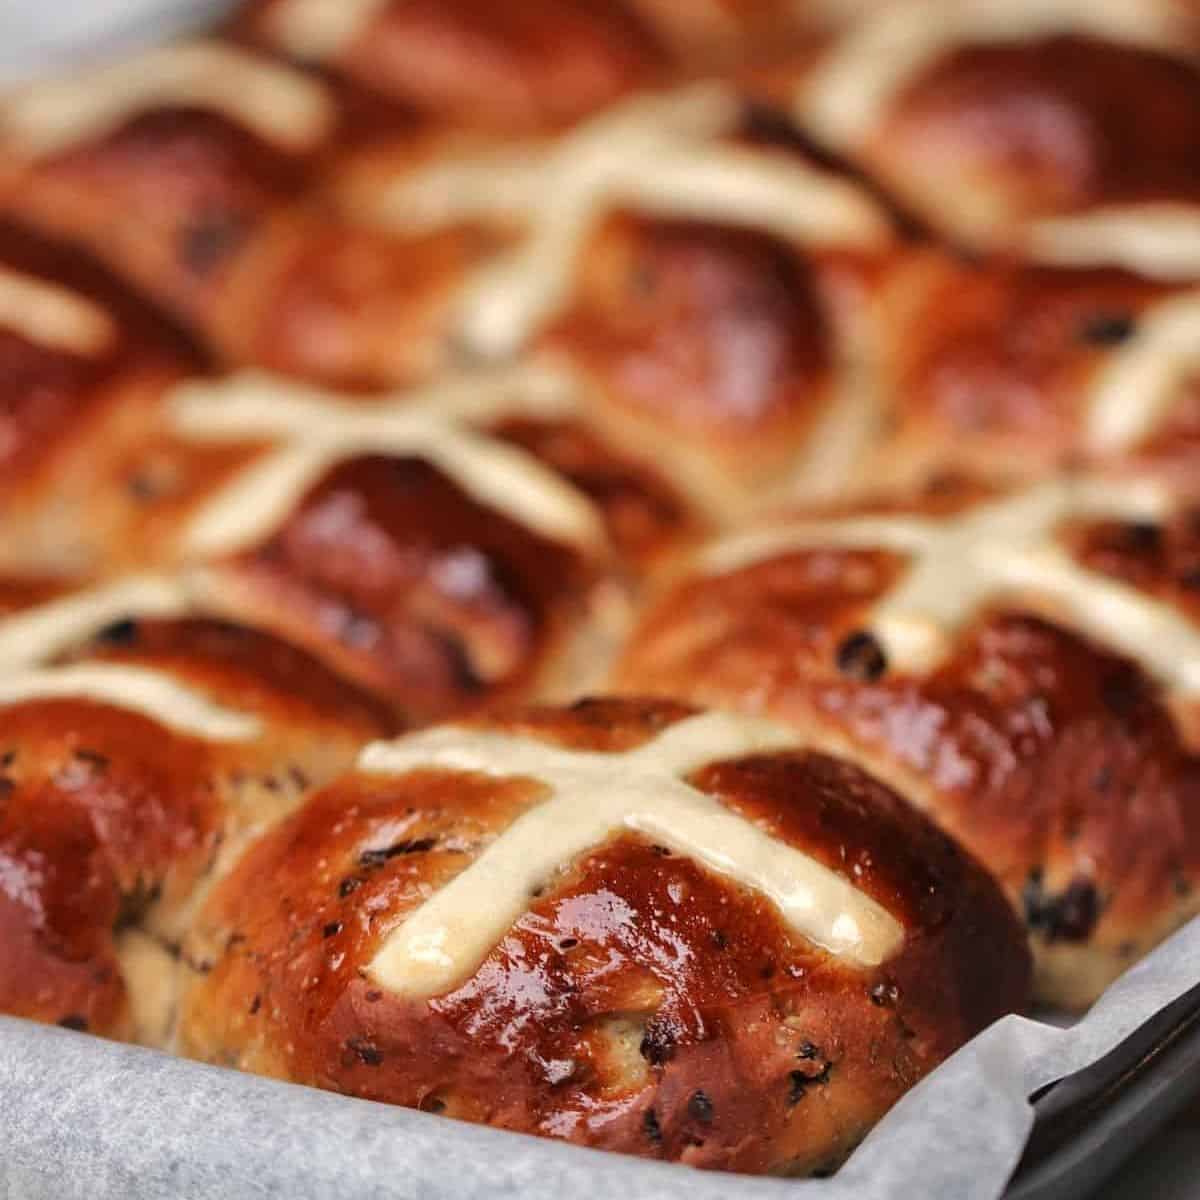 Thermomix Hot Cross Buns.